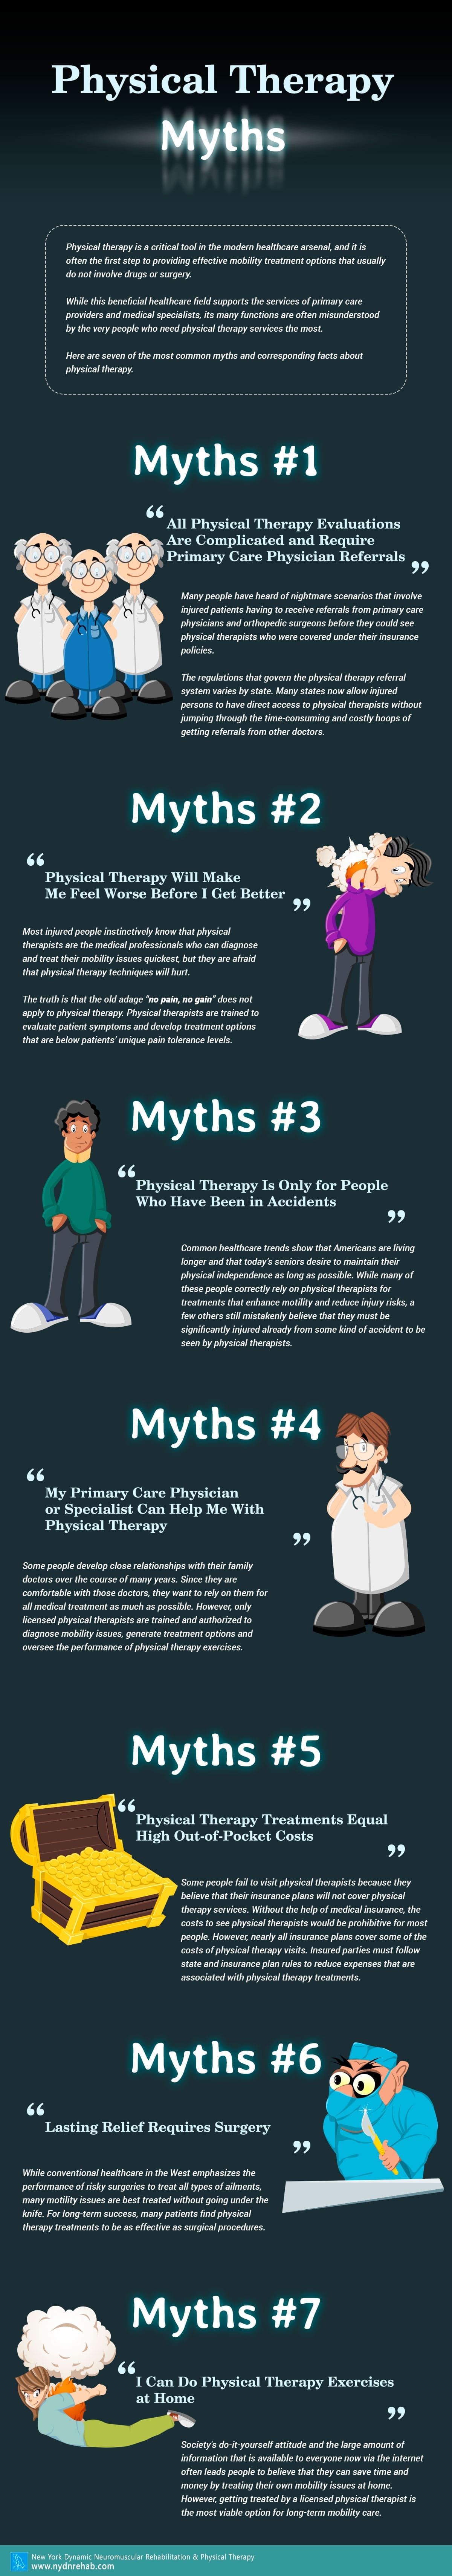 Physical Therapy Myths